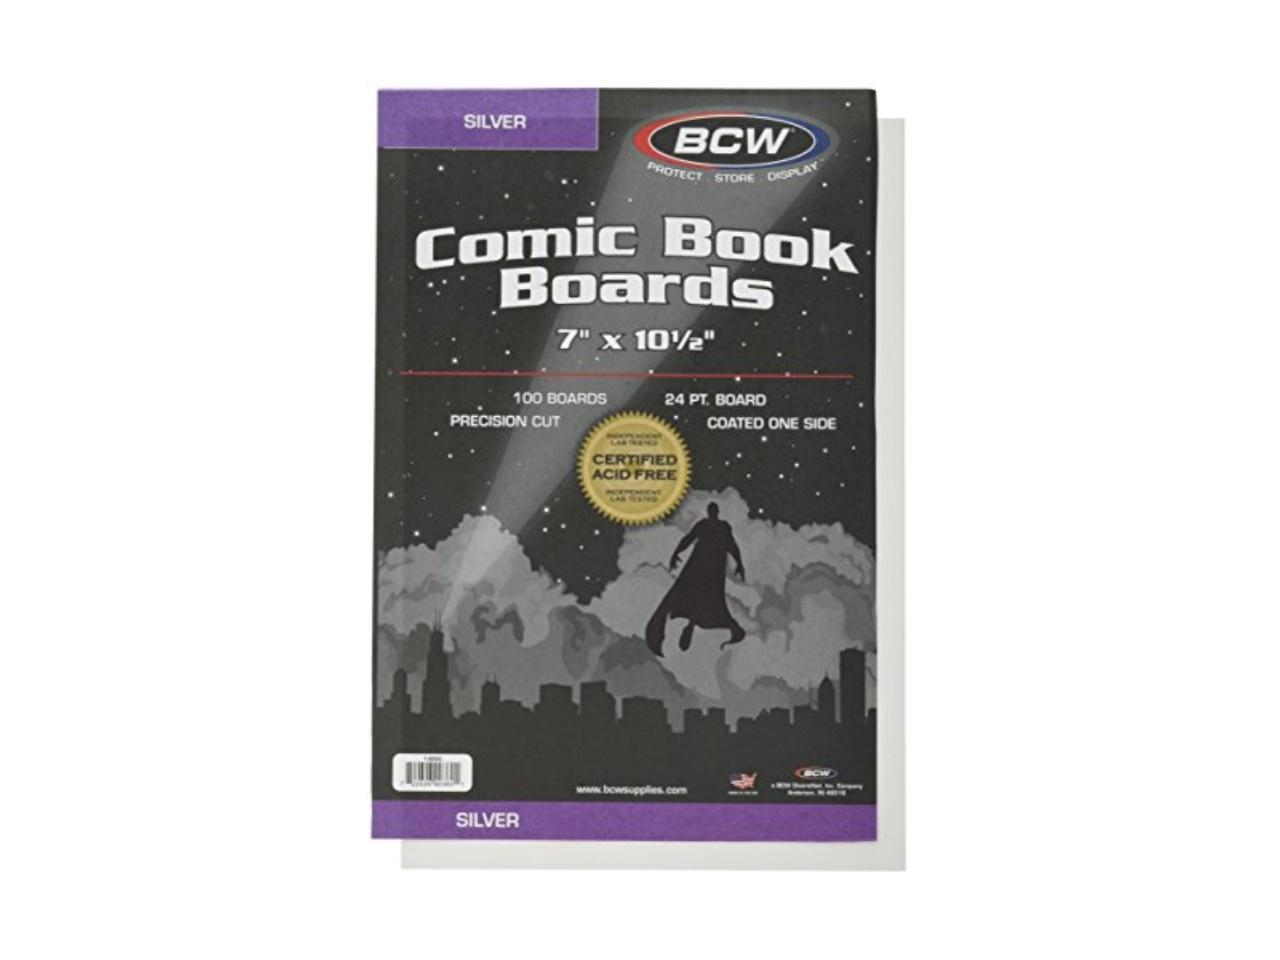 7 x 10 1/2" Silver BCW Backing Boards 